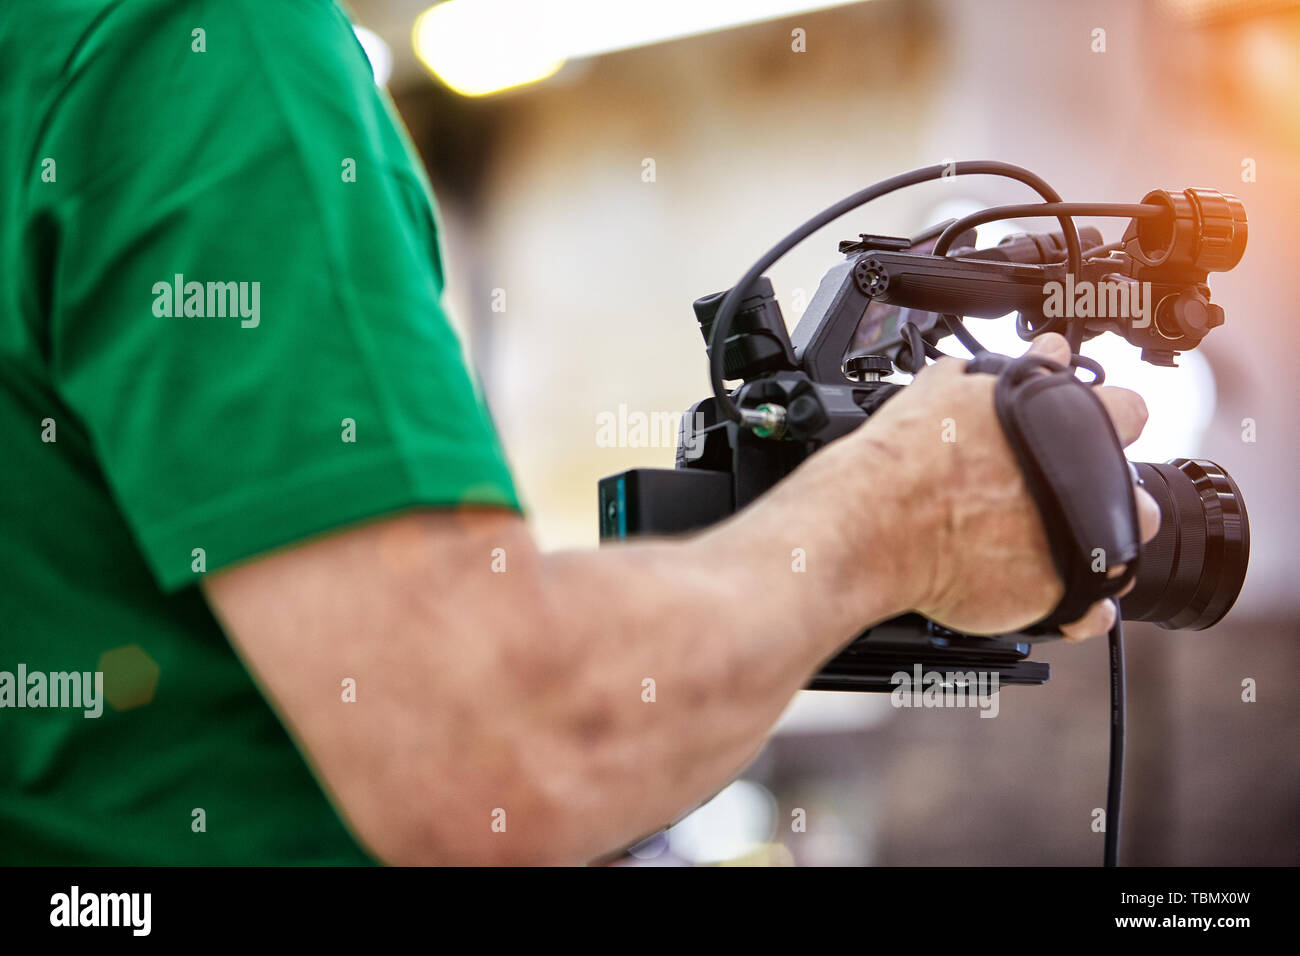 Television Program High Resolution Stock Photography and Images - Alamy